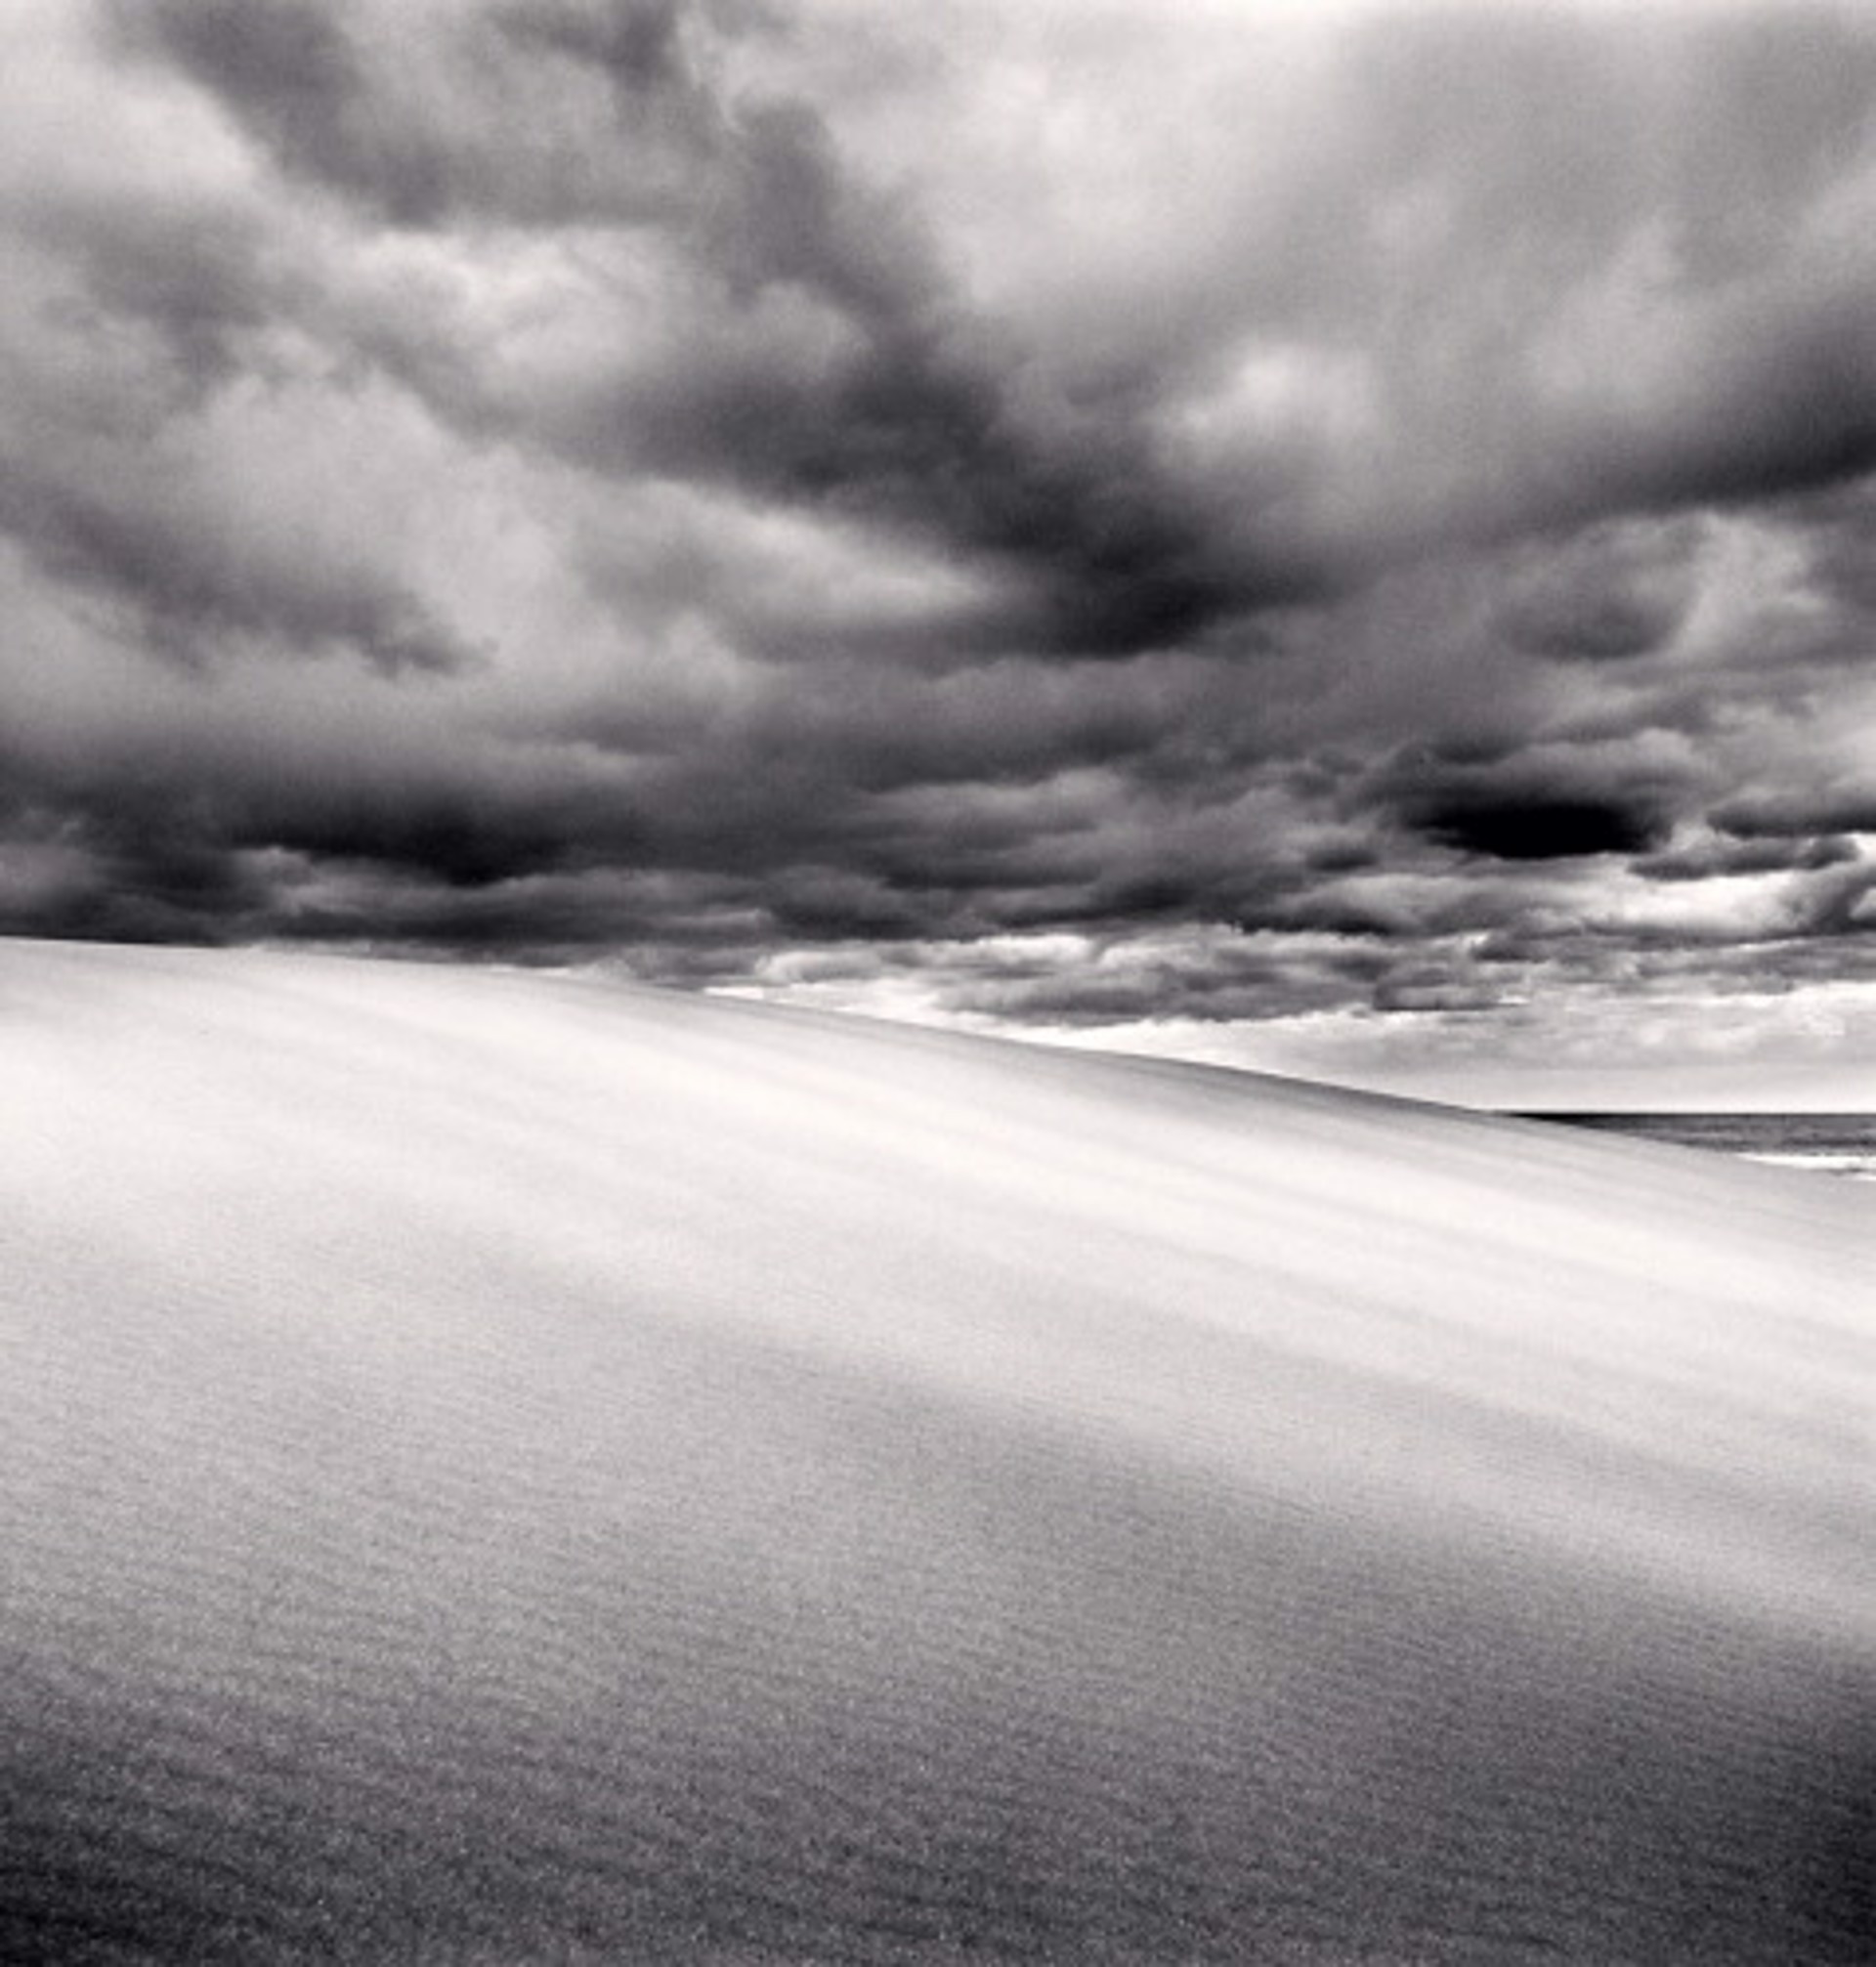 Sand Dunes and Clouds, Tottori, Honshu, Japan (edition of 45) by Michael Kenna